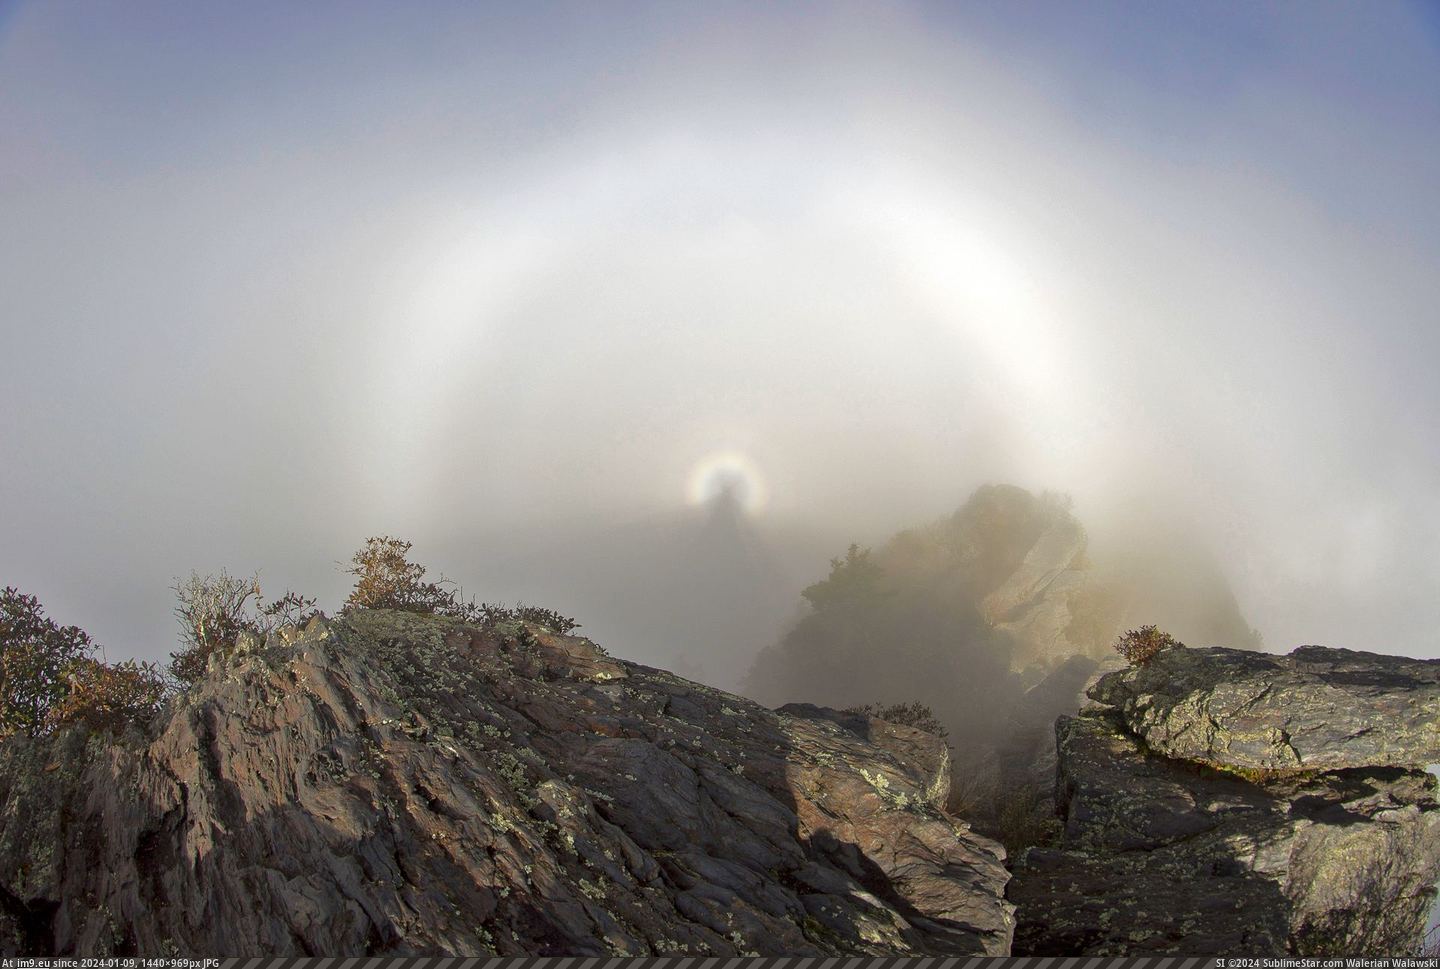 [Earthporn] Halo and rainbow - from Chimney Tops, TN [1920x1276] (in My r/EARTHPORN favs)